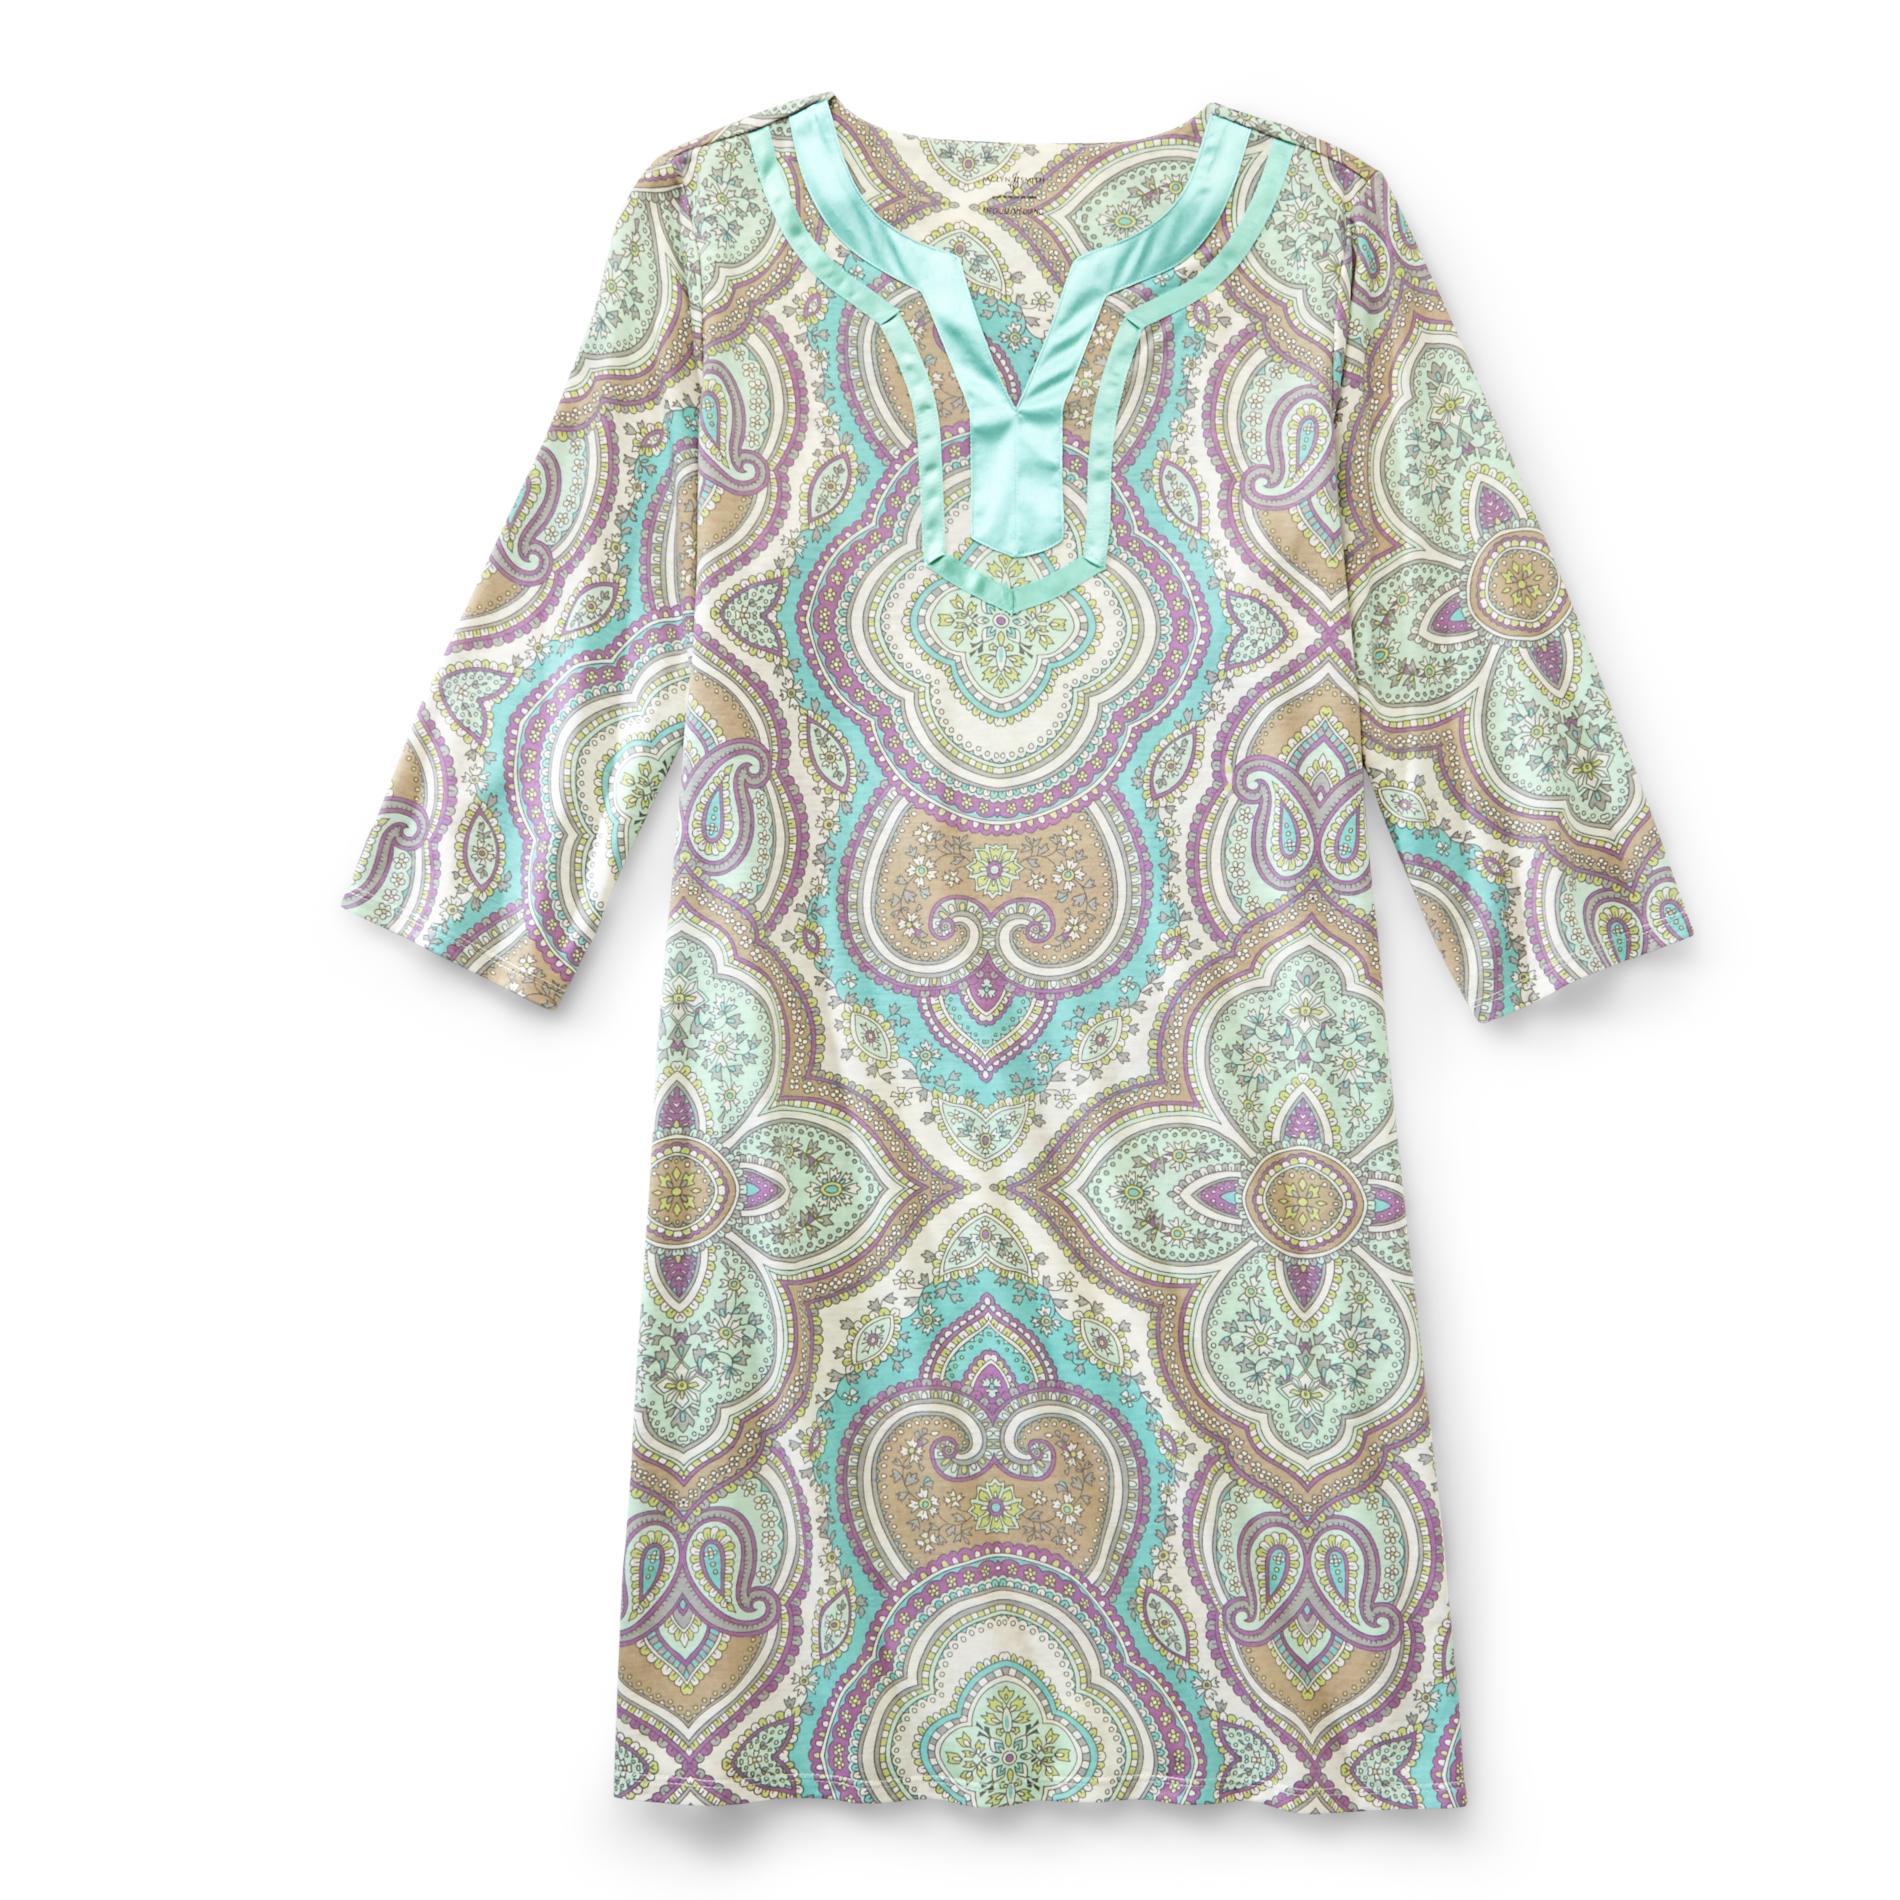 Jaclyn Smith Women's Notched-Neck Caftan Nightgown - Paisley